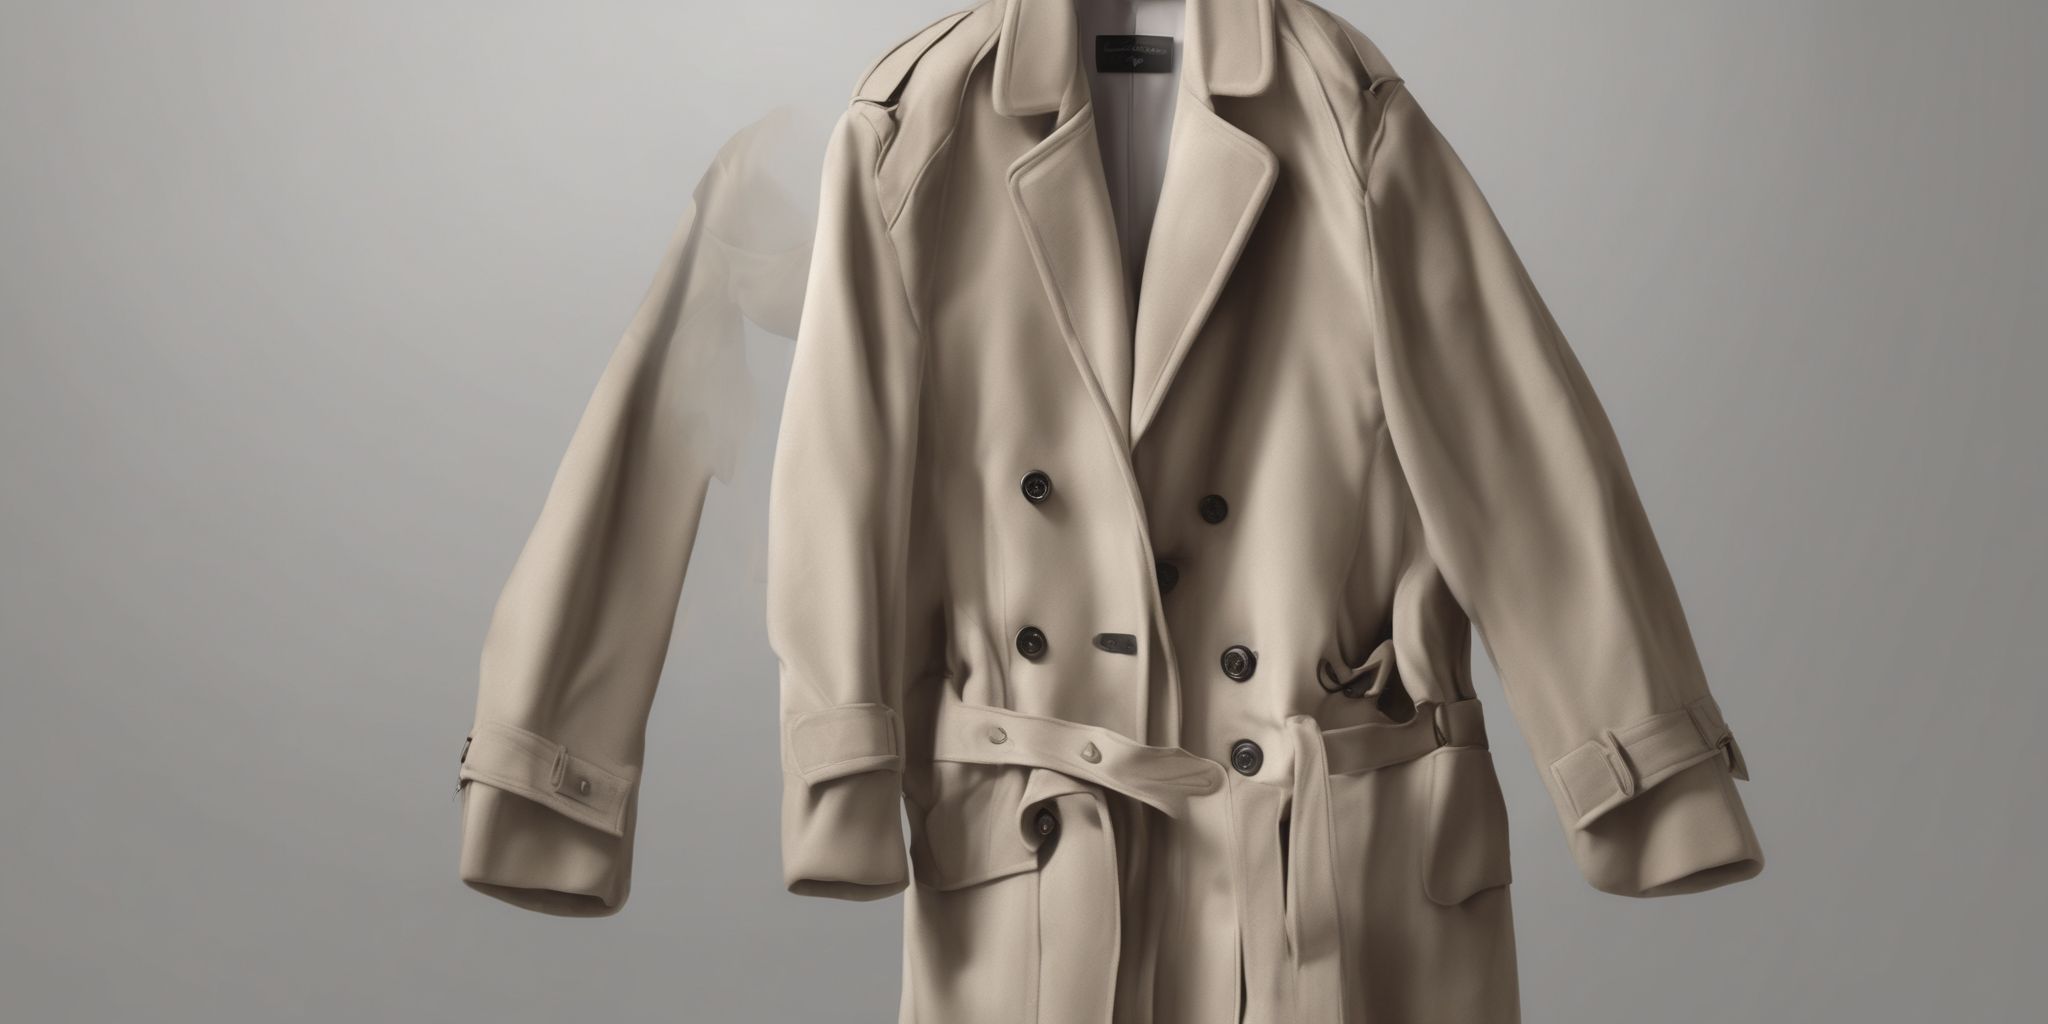 Coat  in realistic, photographic style